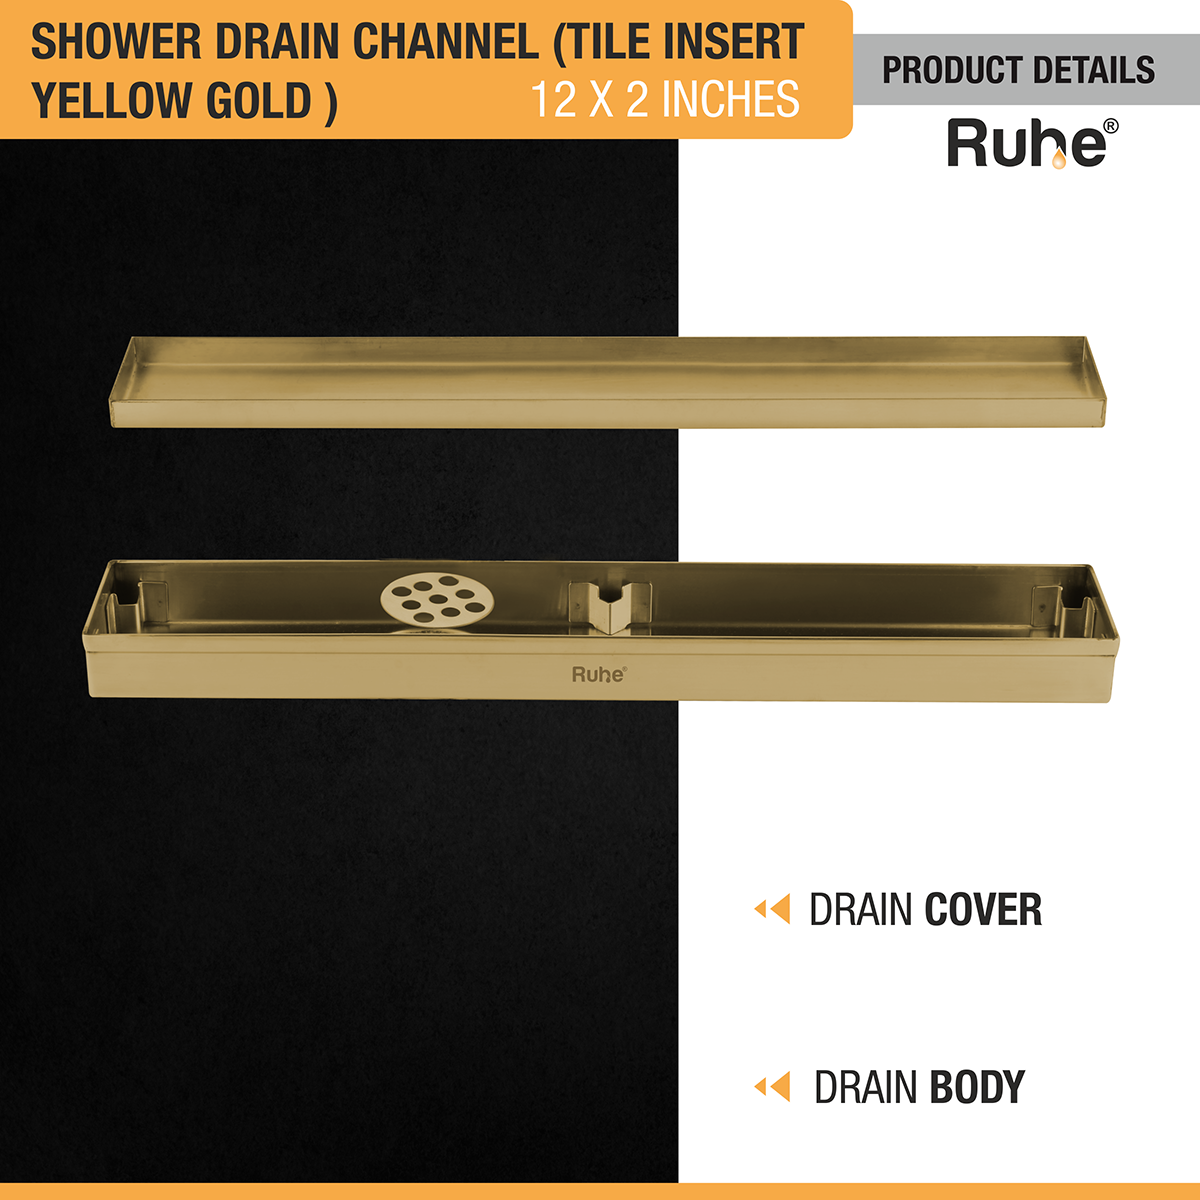 Tile Insert Shower Drain Channel (12 x 2 Inches) YELLOW GOLD PVD Coated - by Ruhe®